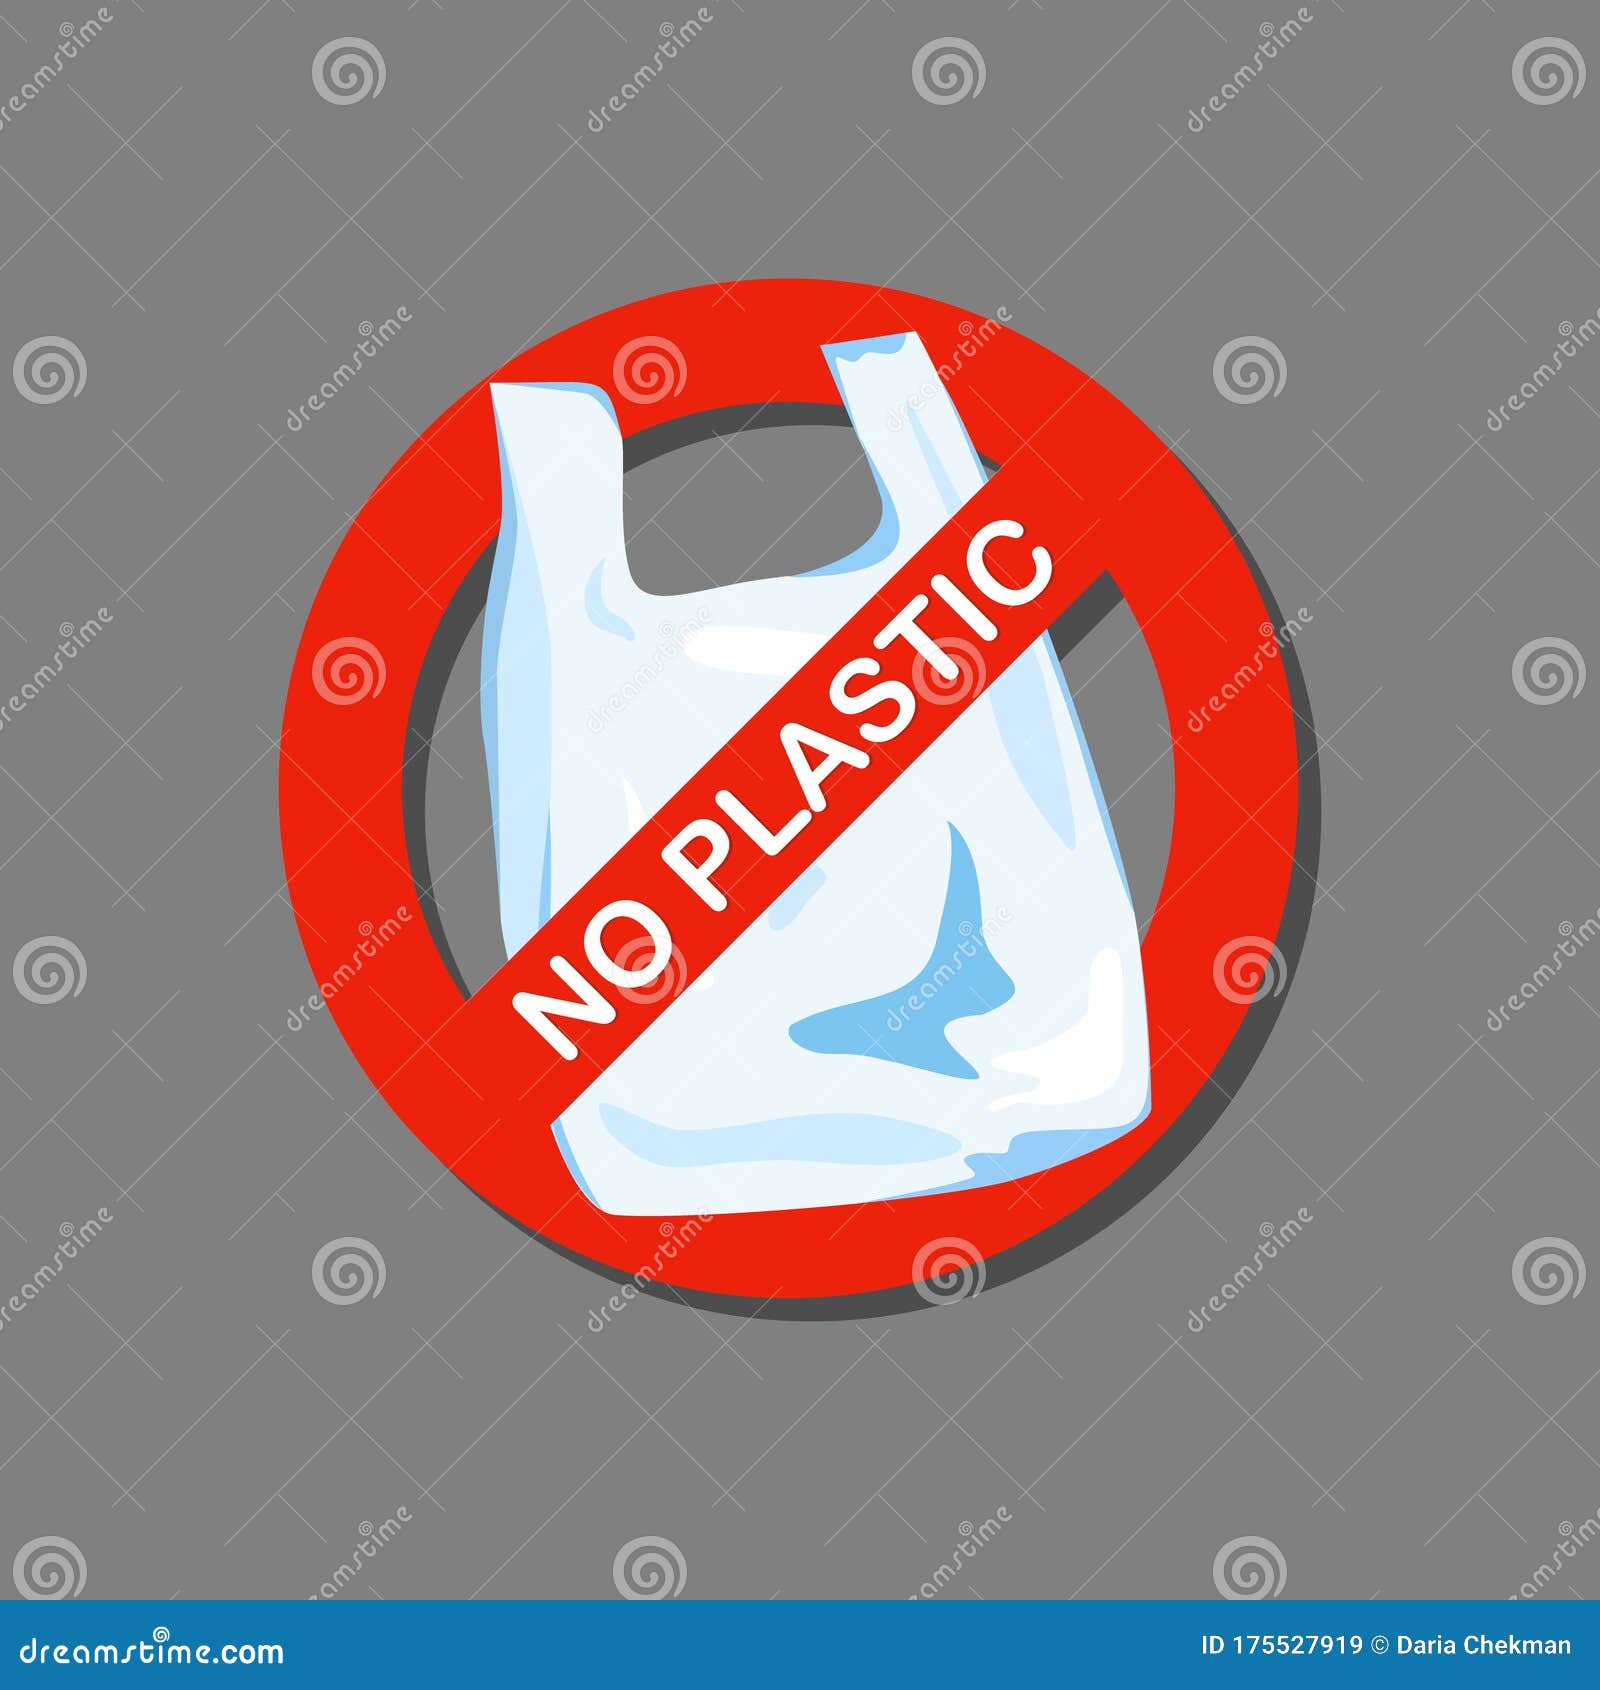 Stop Using Plastic Products Set, Stop Using Plastic Bottles, Stop Using ...